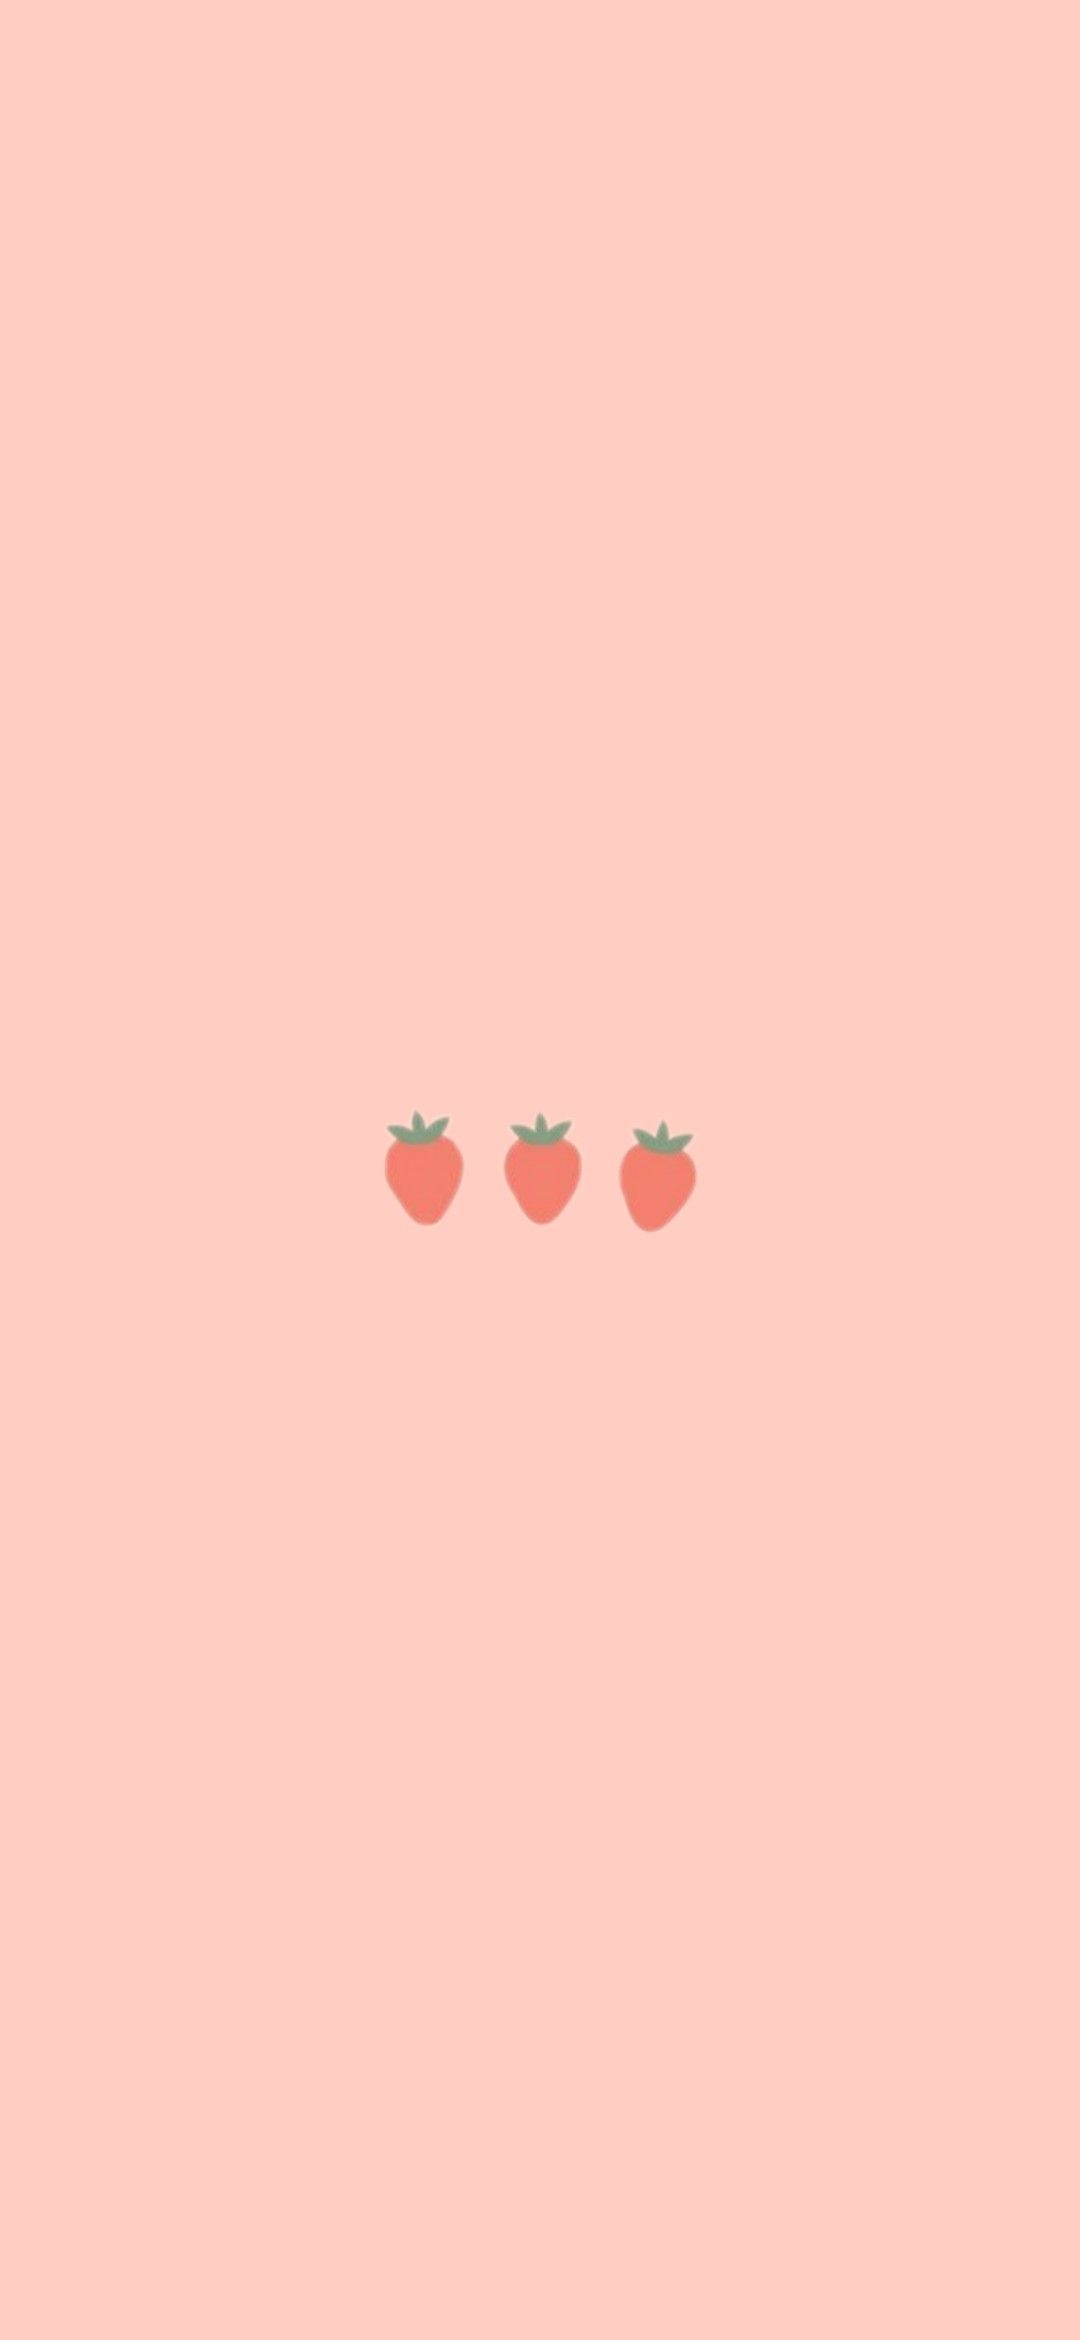 Cute Strawberry Pattern Phone Wallpaper Background Wallpaper Image For Free  Download  Pngtree